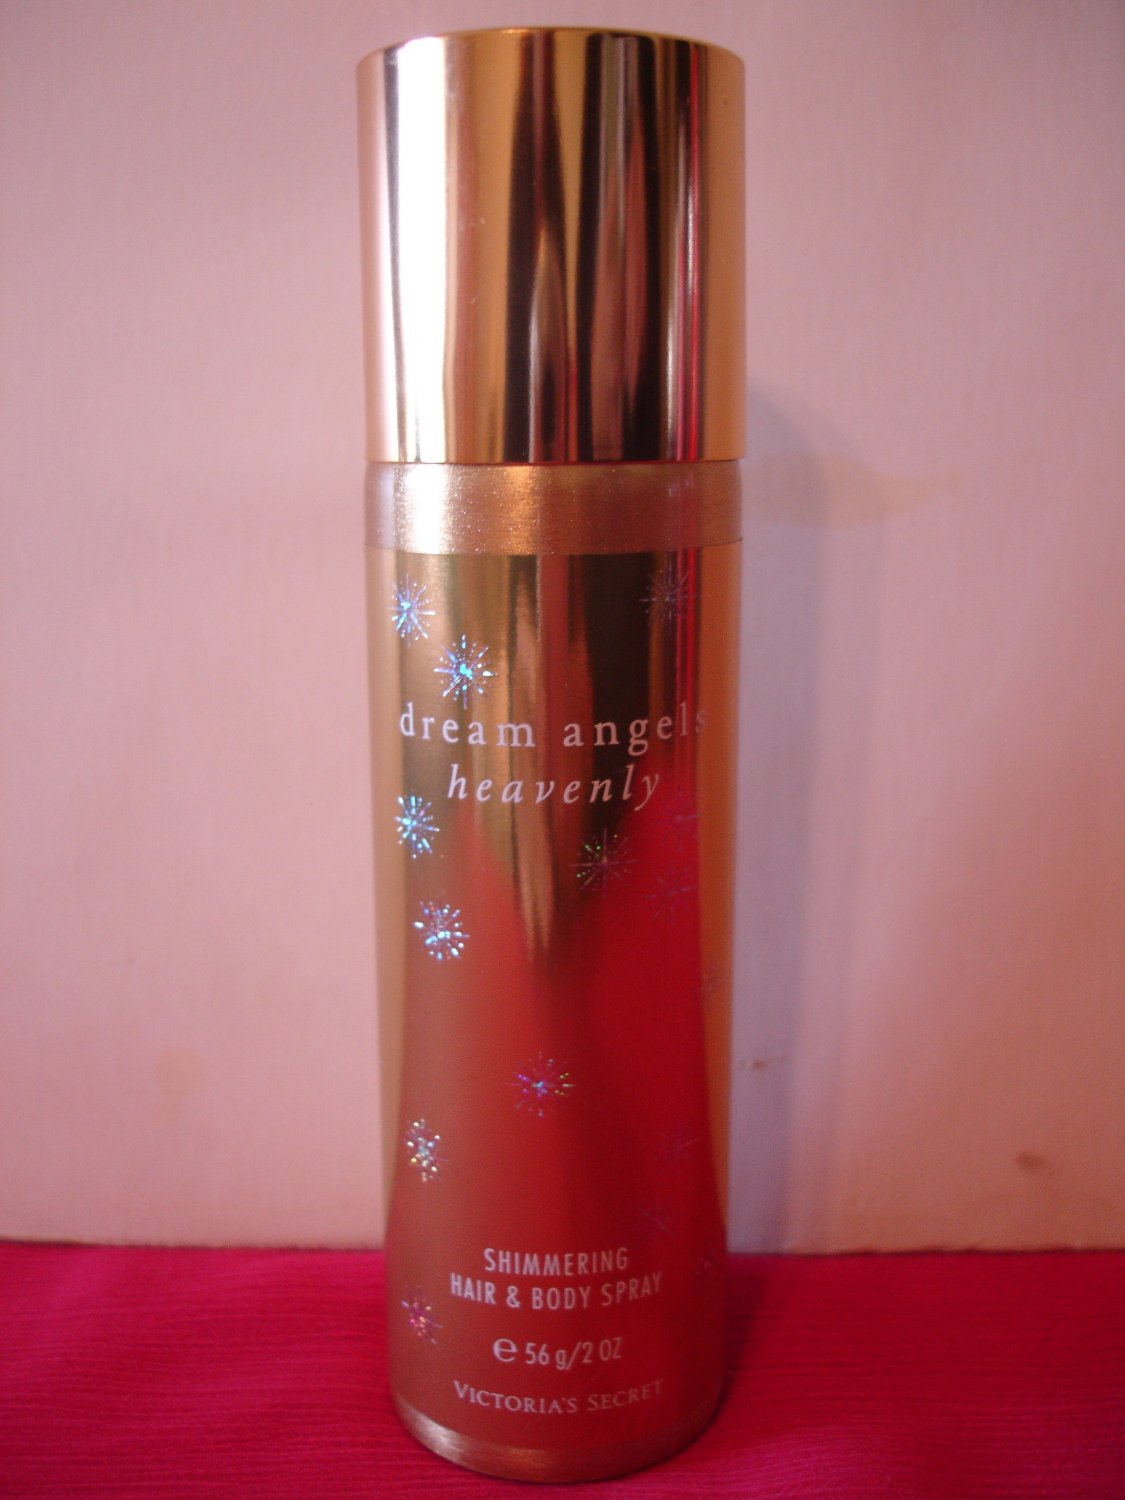 Victoria's Secret Dream Angels Heavenly Shimmering Hair and Body Spray